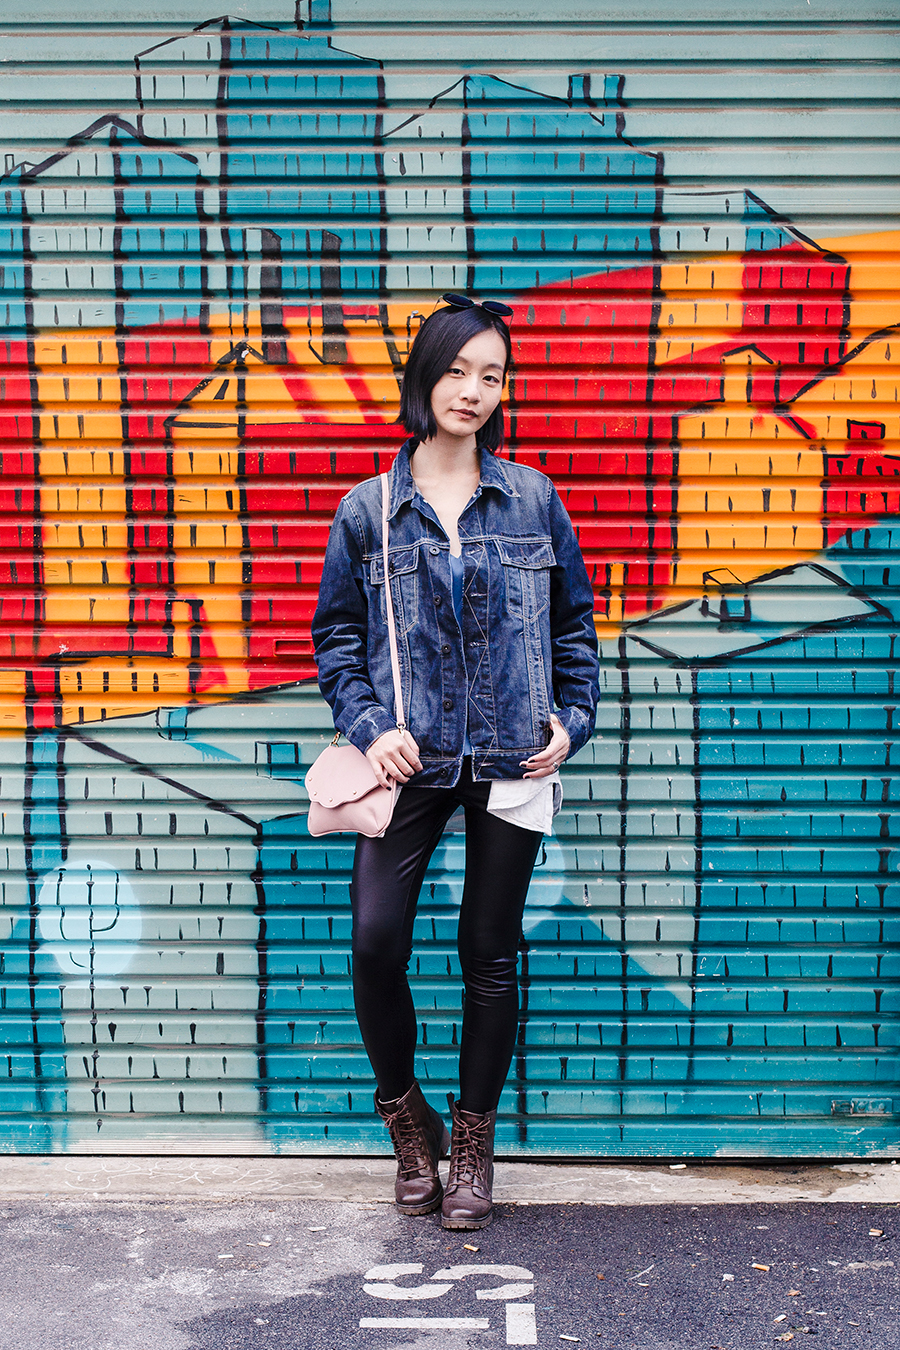 Denim leather outfit in front of a mural in Perth Australia.